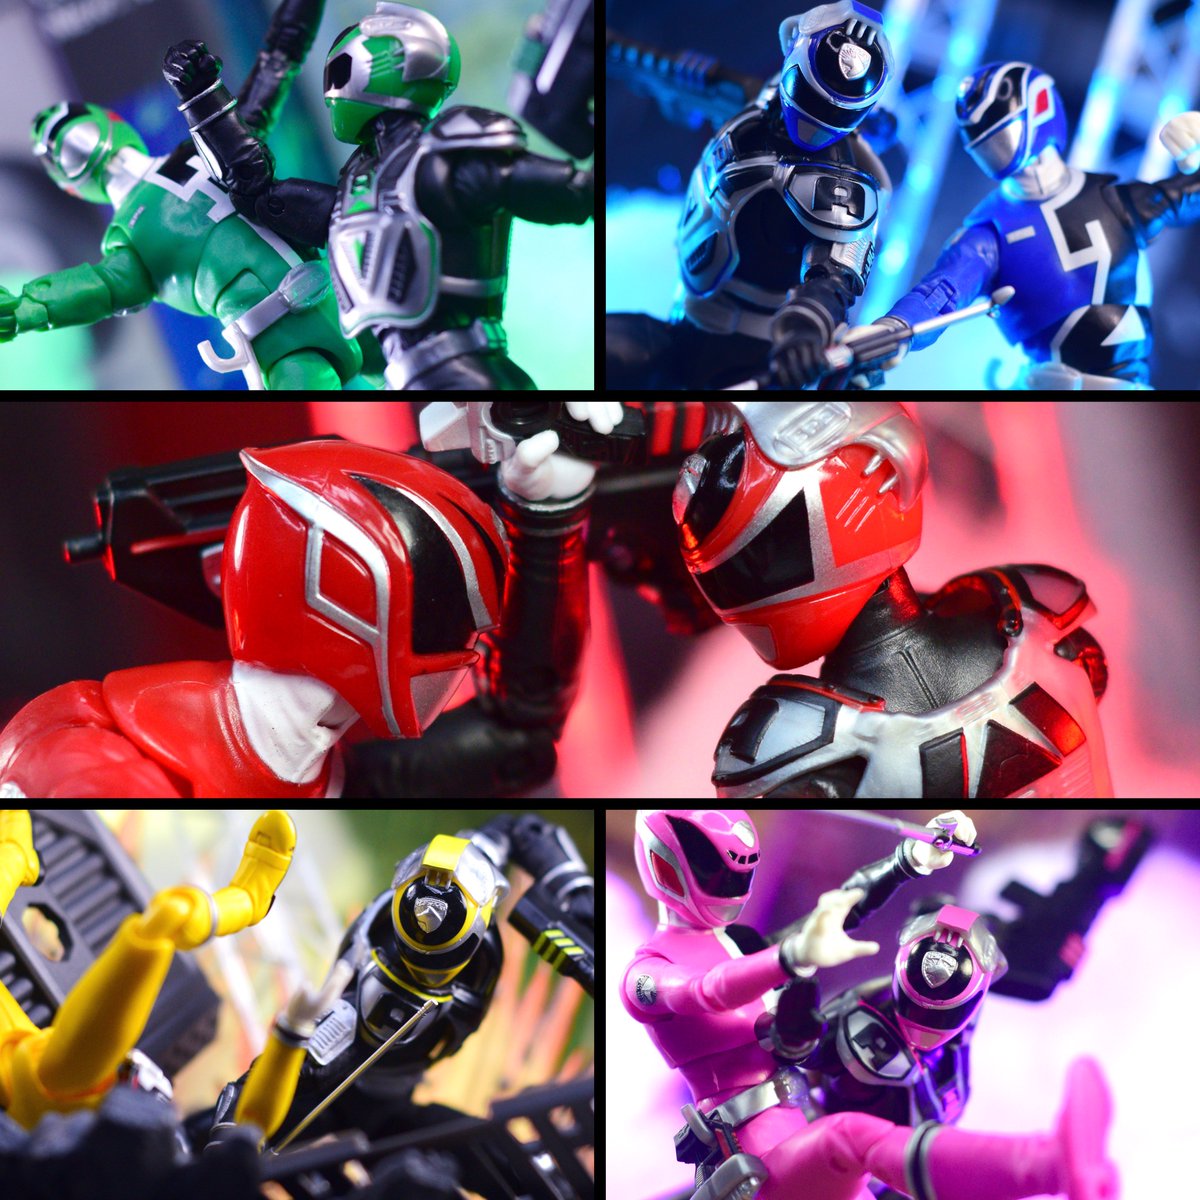 A-Squad VS B-Squad!!!
Which team are you on?!
#powerrangers #powerrangersspd #powermonth #hasbro #hasbropulse #lightningcollection